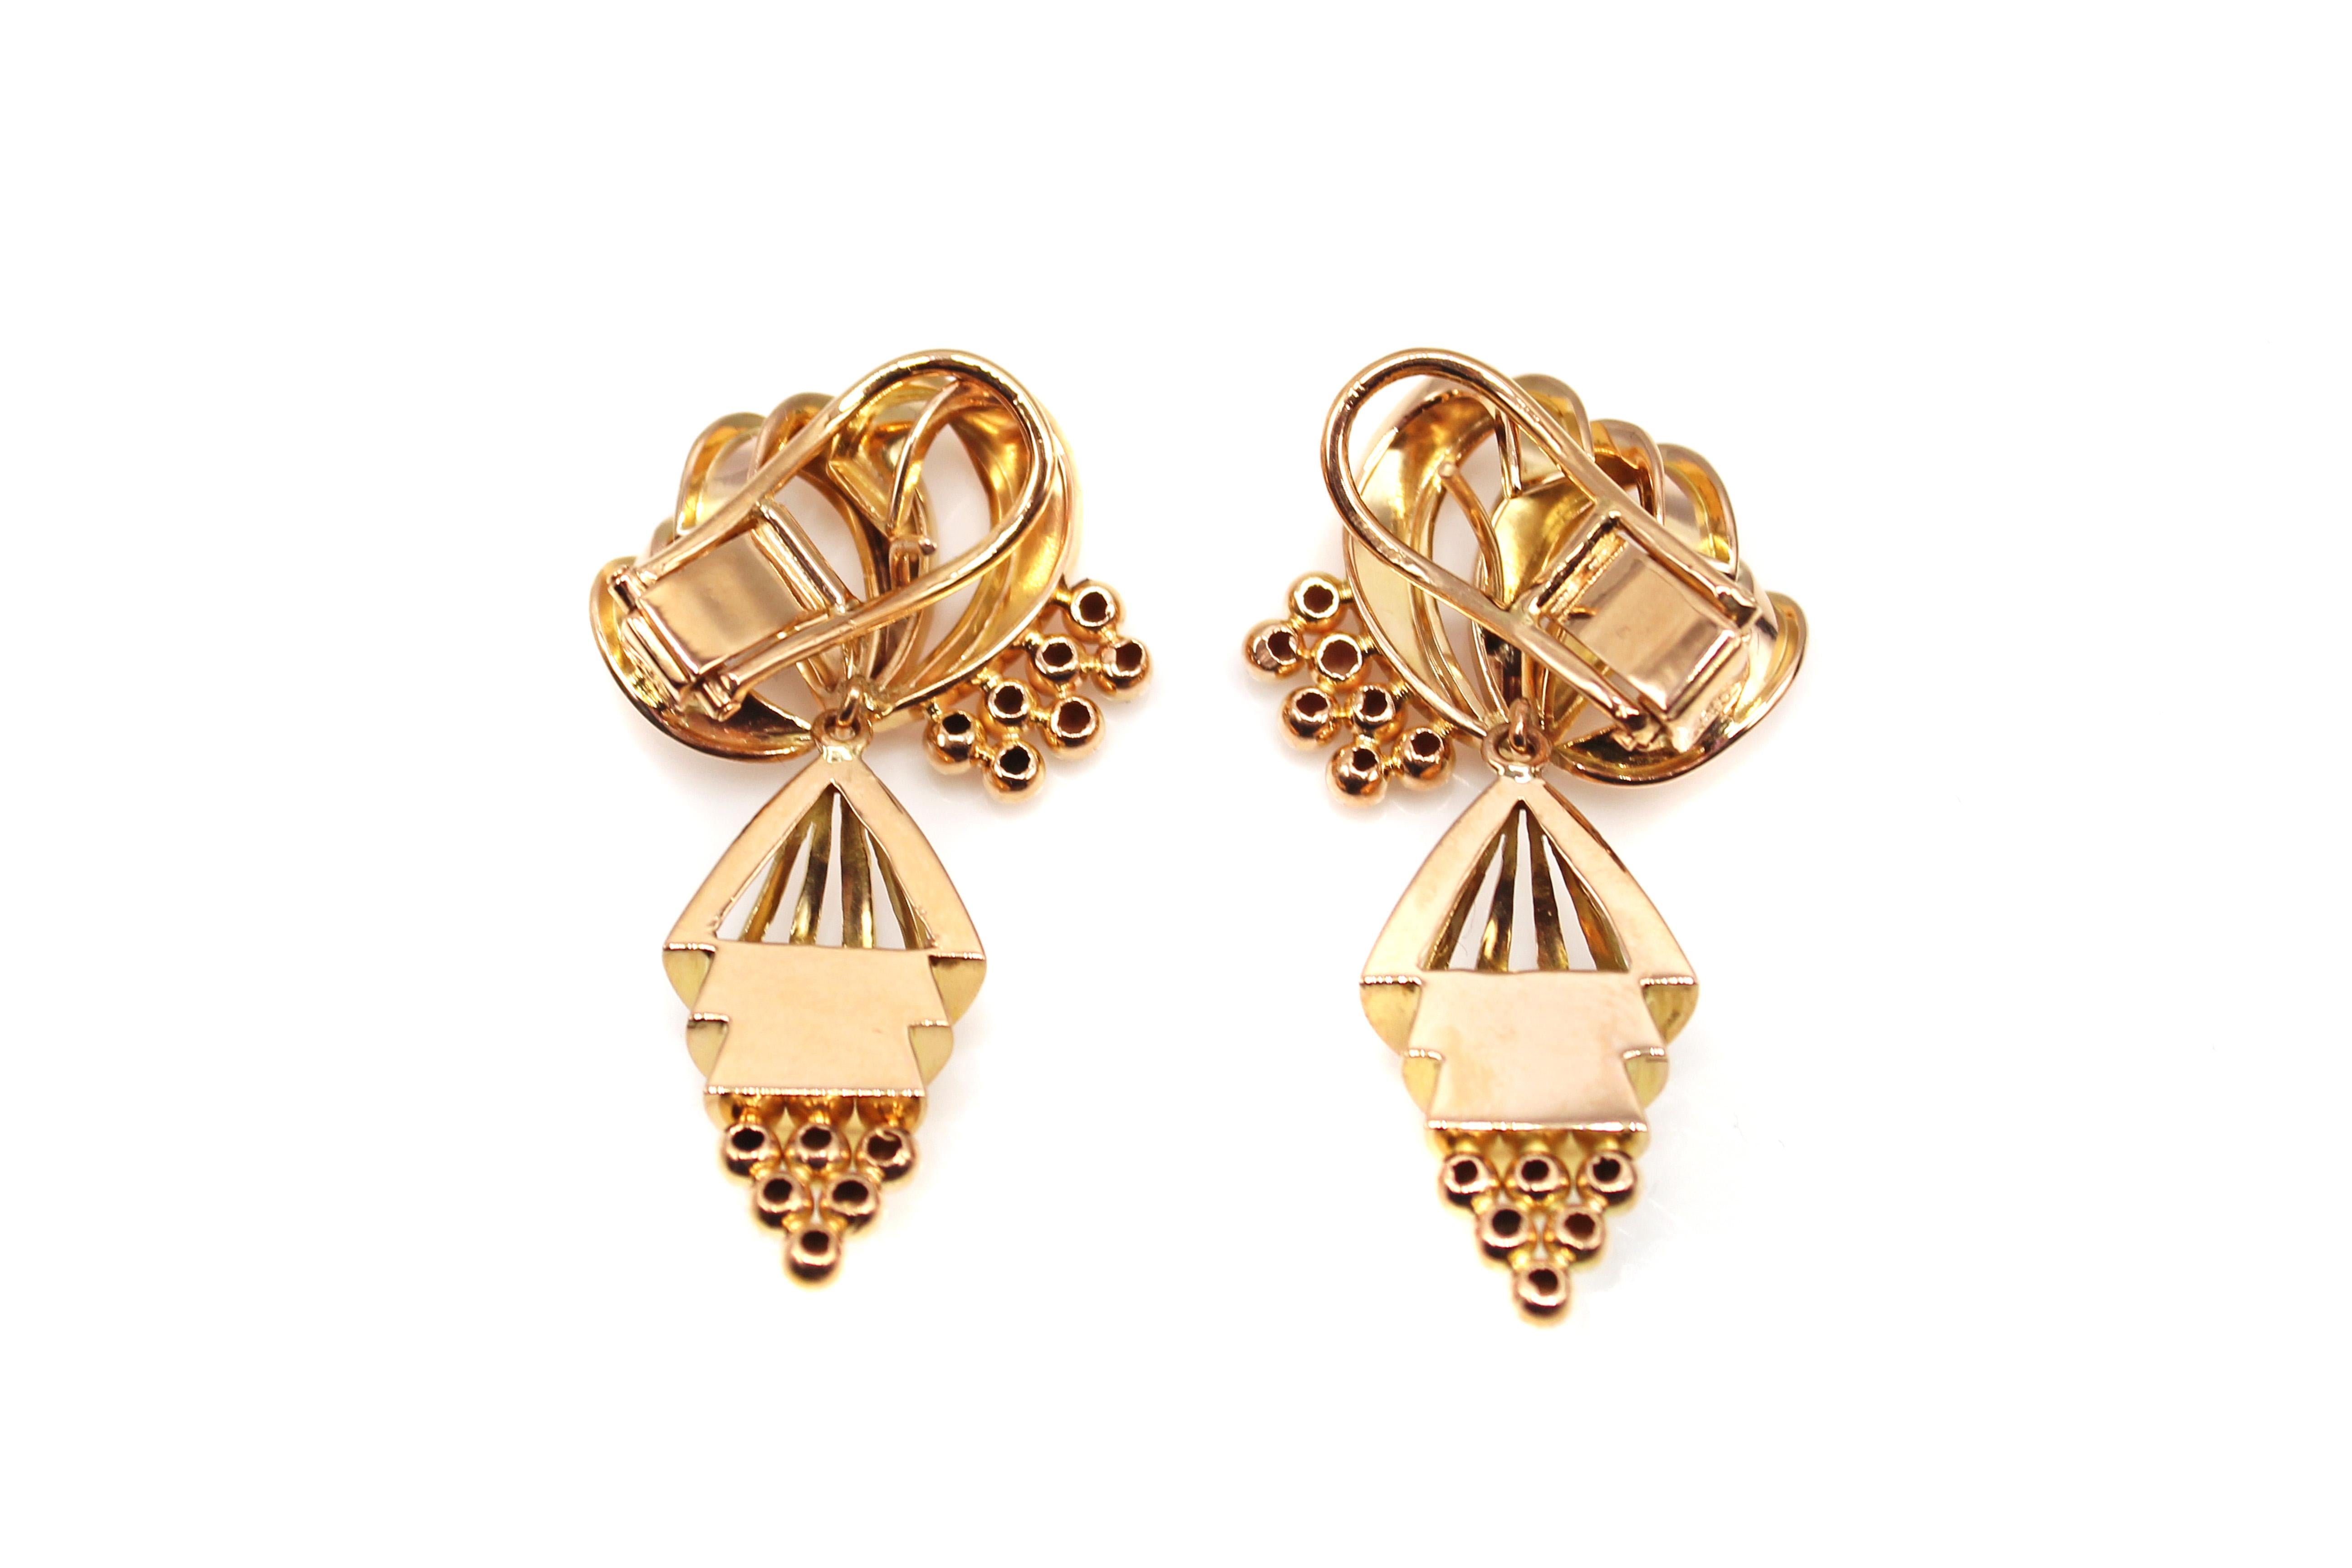 These chic Retro ear clips from ca. 1945 have been wonderfully handcrafted in 18 karat rose gold with the typical abstract designs of this era. While the top has 3 ribbon-like elements with polished gold beads on the edge - giving them a